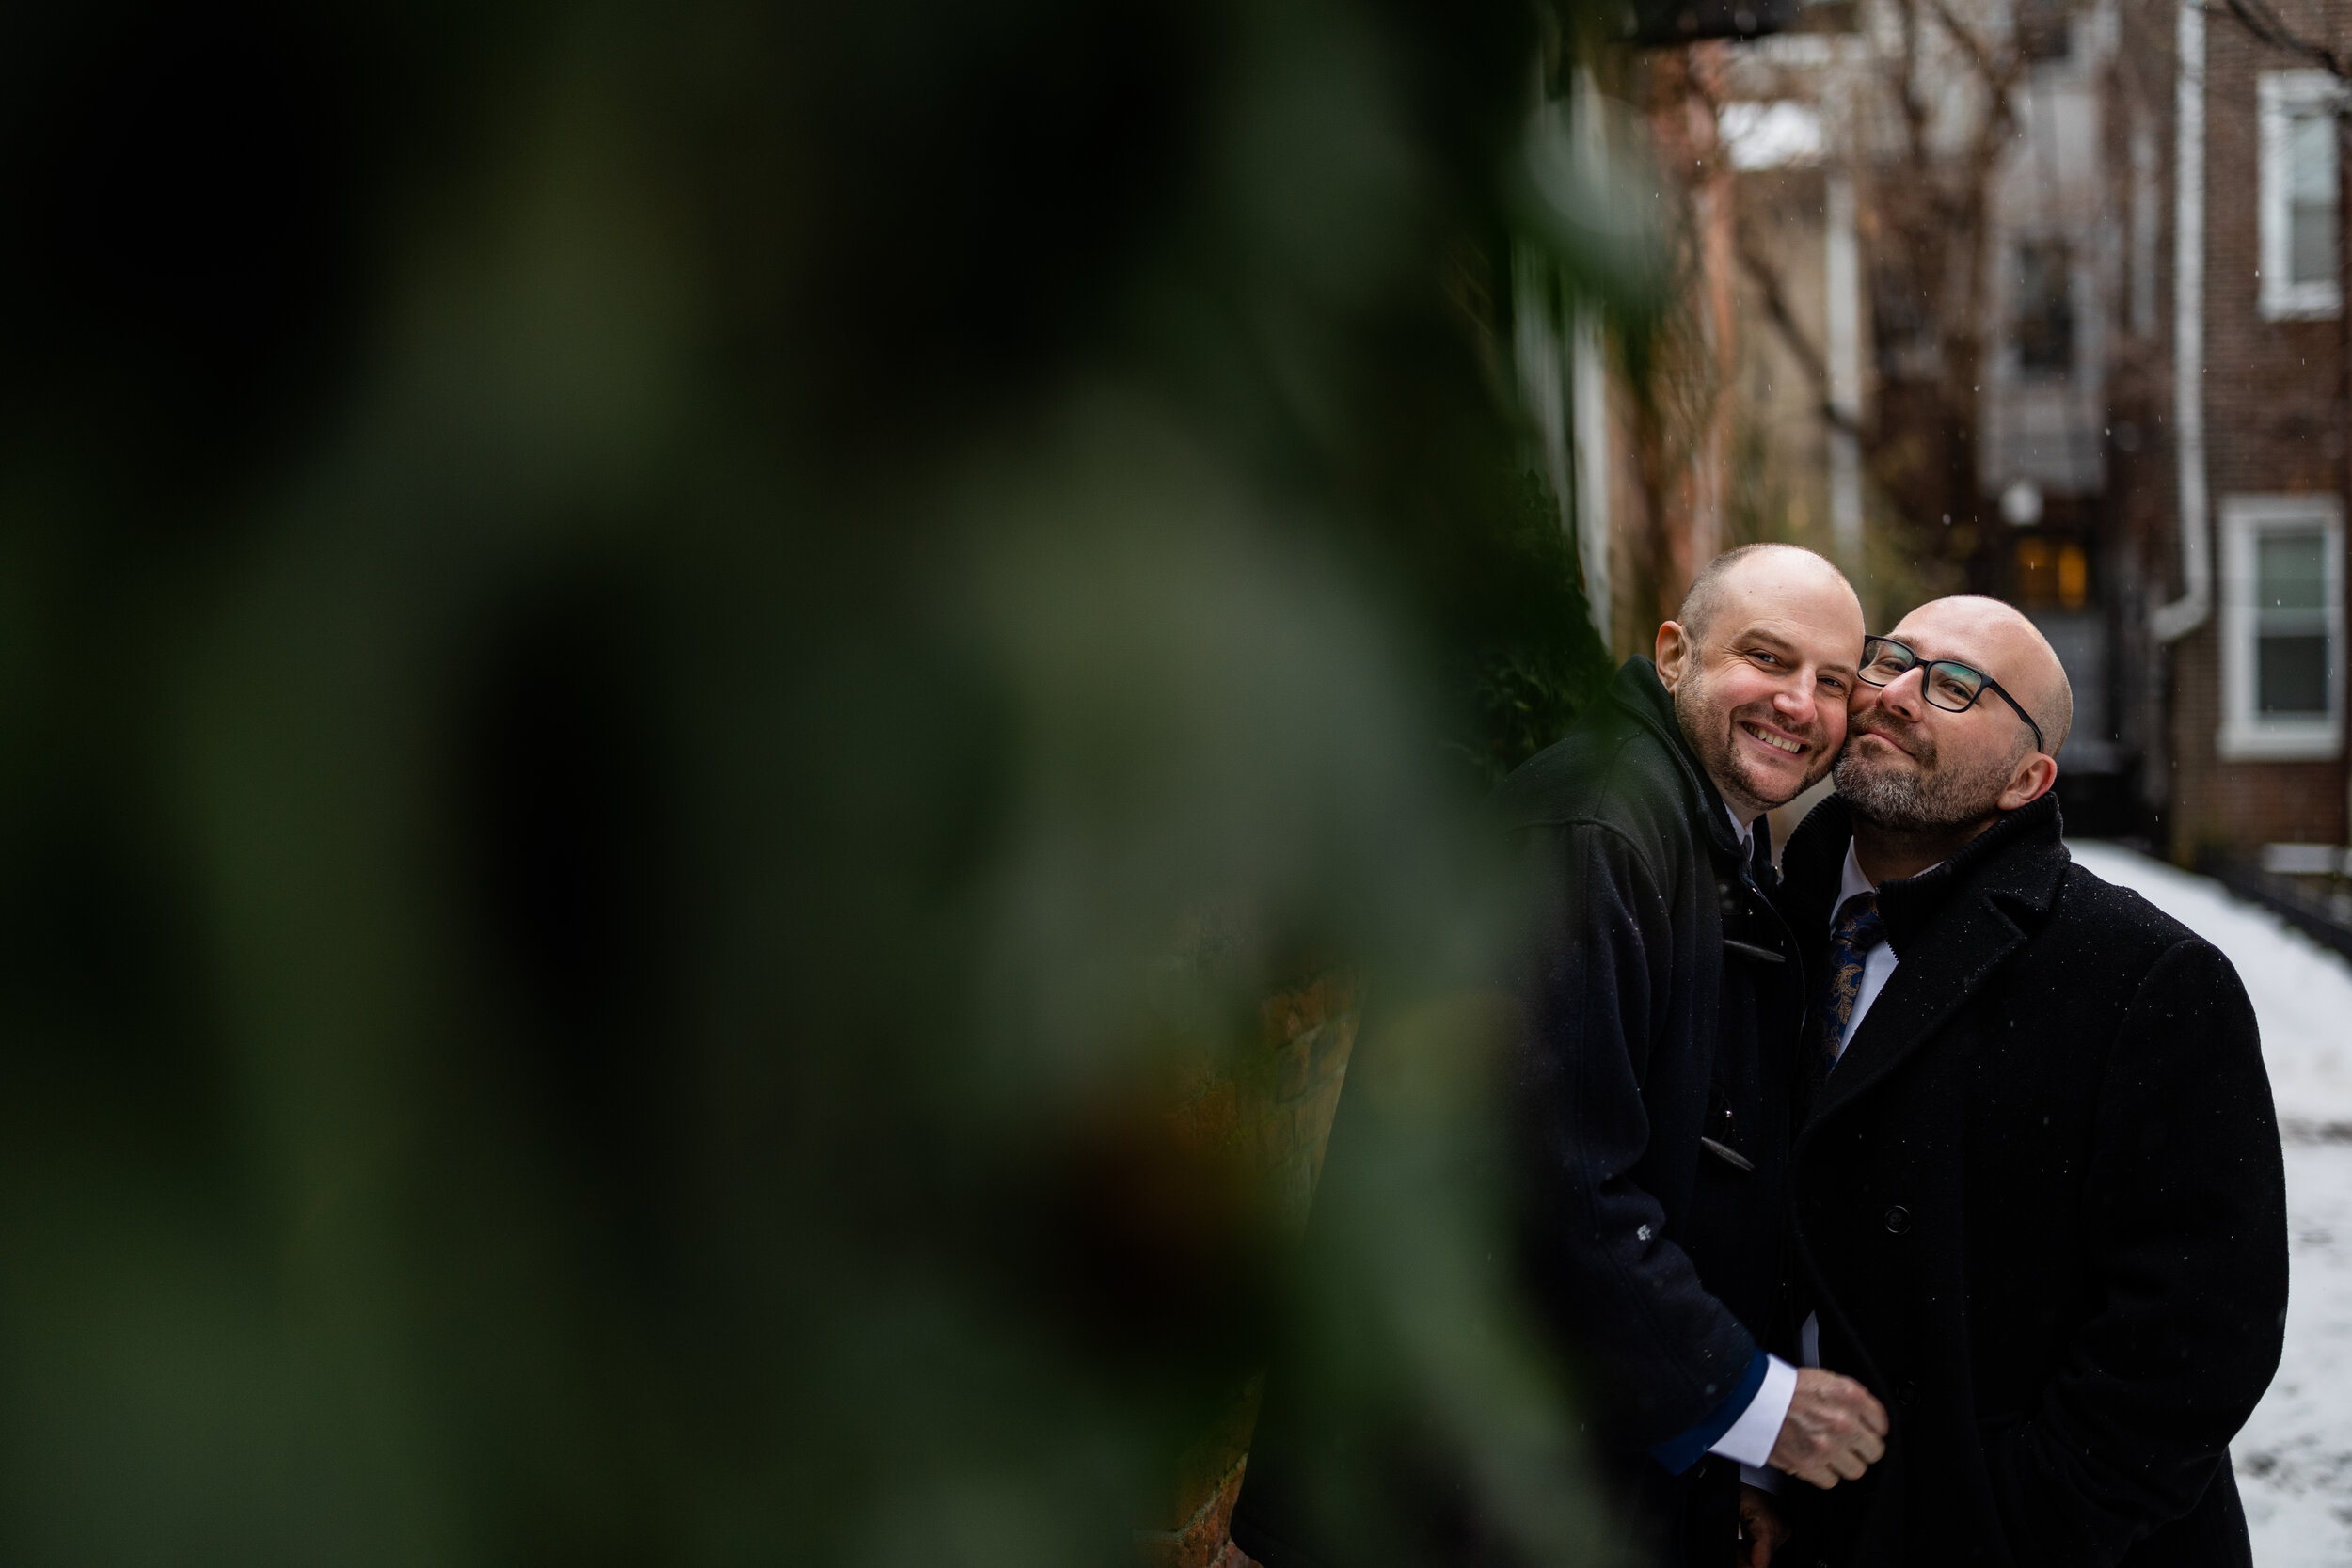 Curtis-and-Bill-Snowy-Vaux-Philly-Elopement-263.jpg